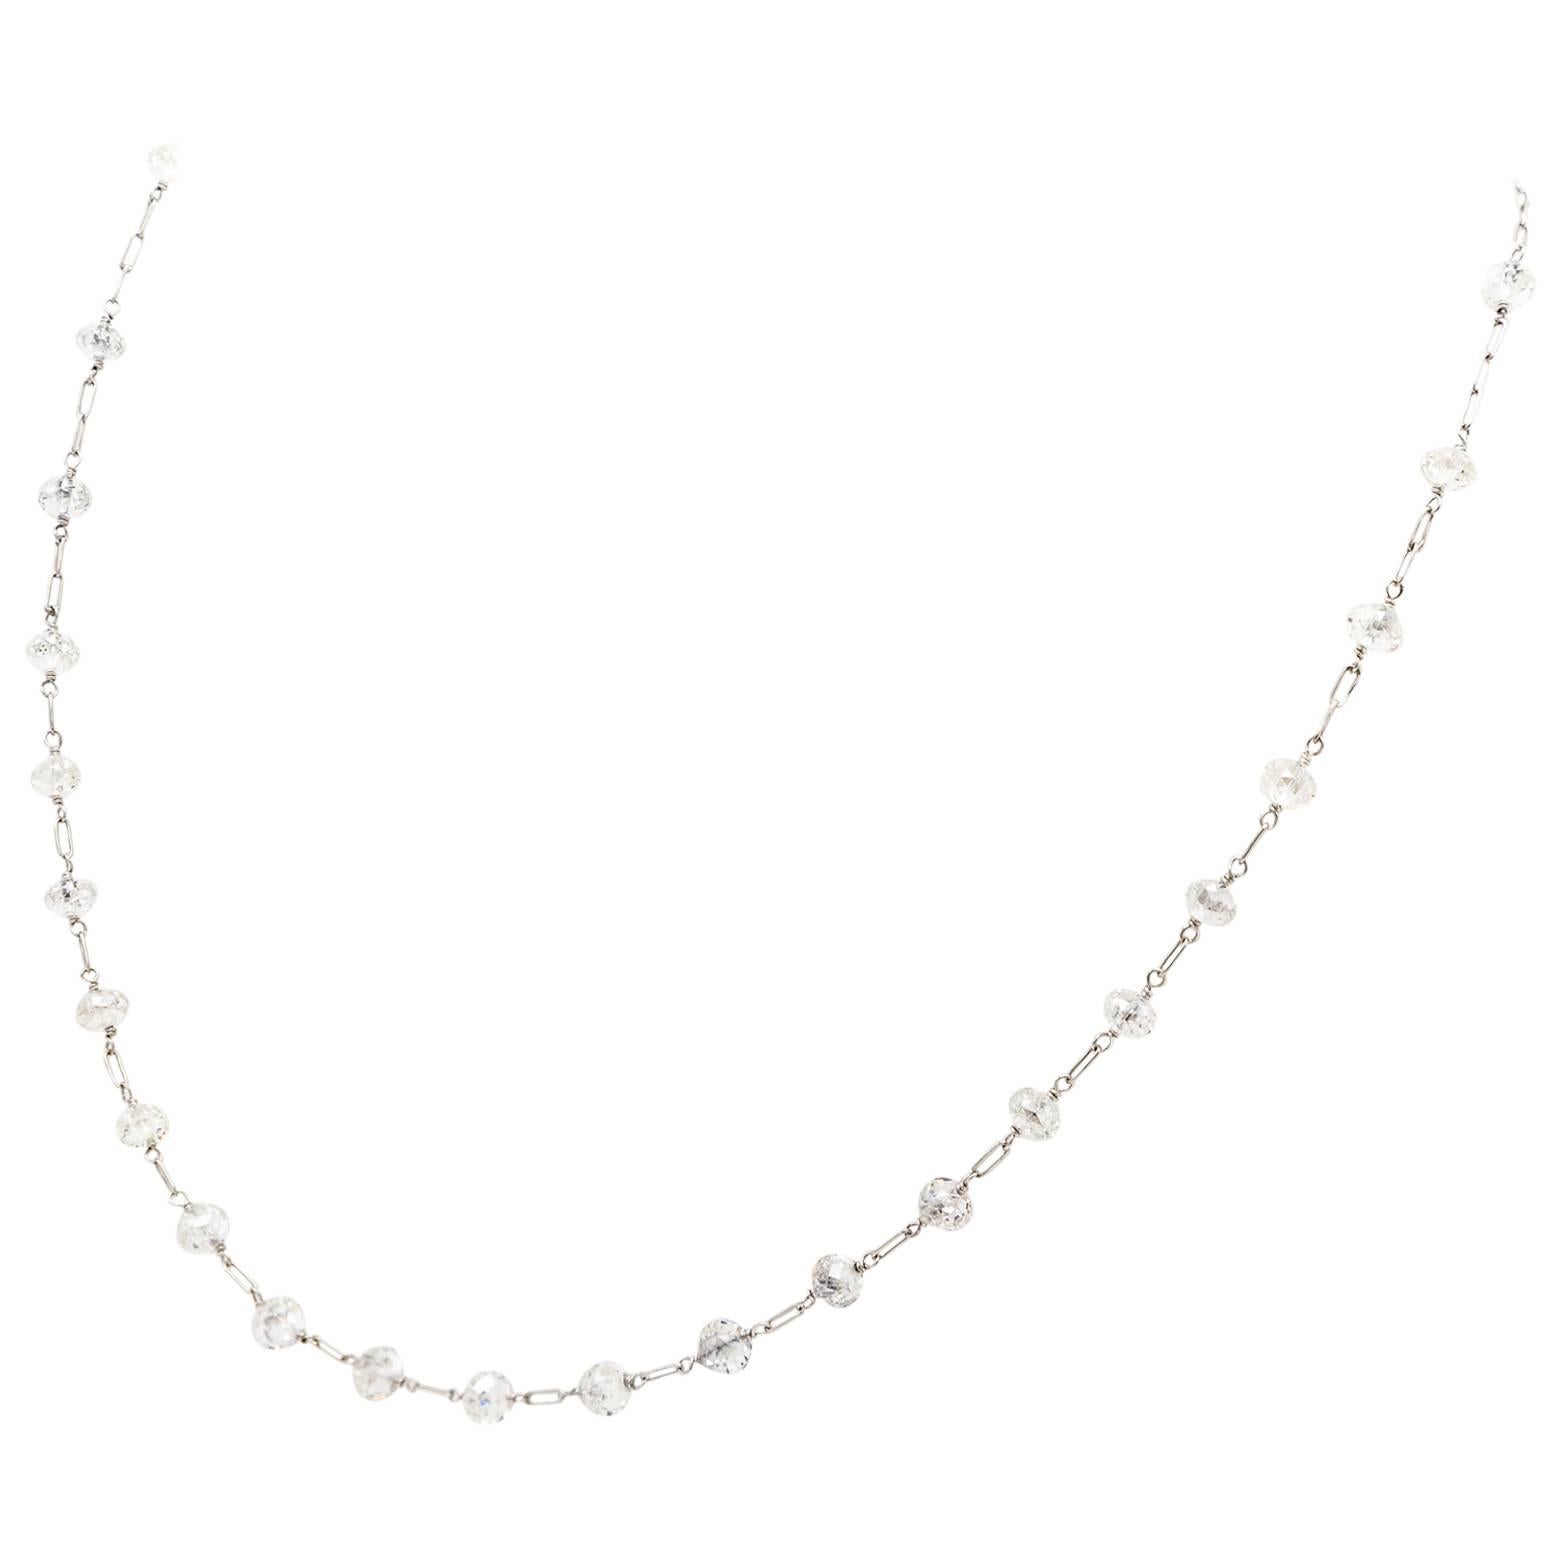 27 astonishingly beautiful faceted diamond beads (approximately 38 carats) decorated on a platinum chain. A classical timeless diamond necklace that is stunning! Diamonds have forever been used for longevity, balance, clarity, and success. They also